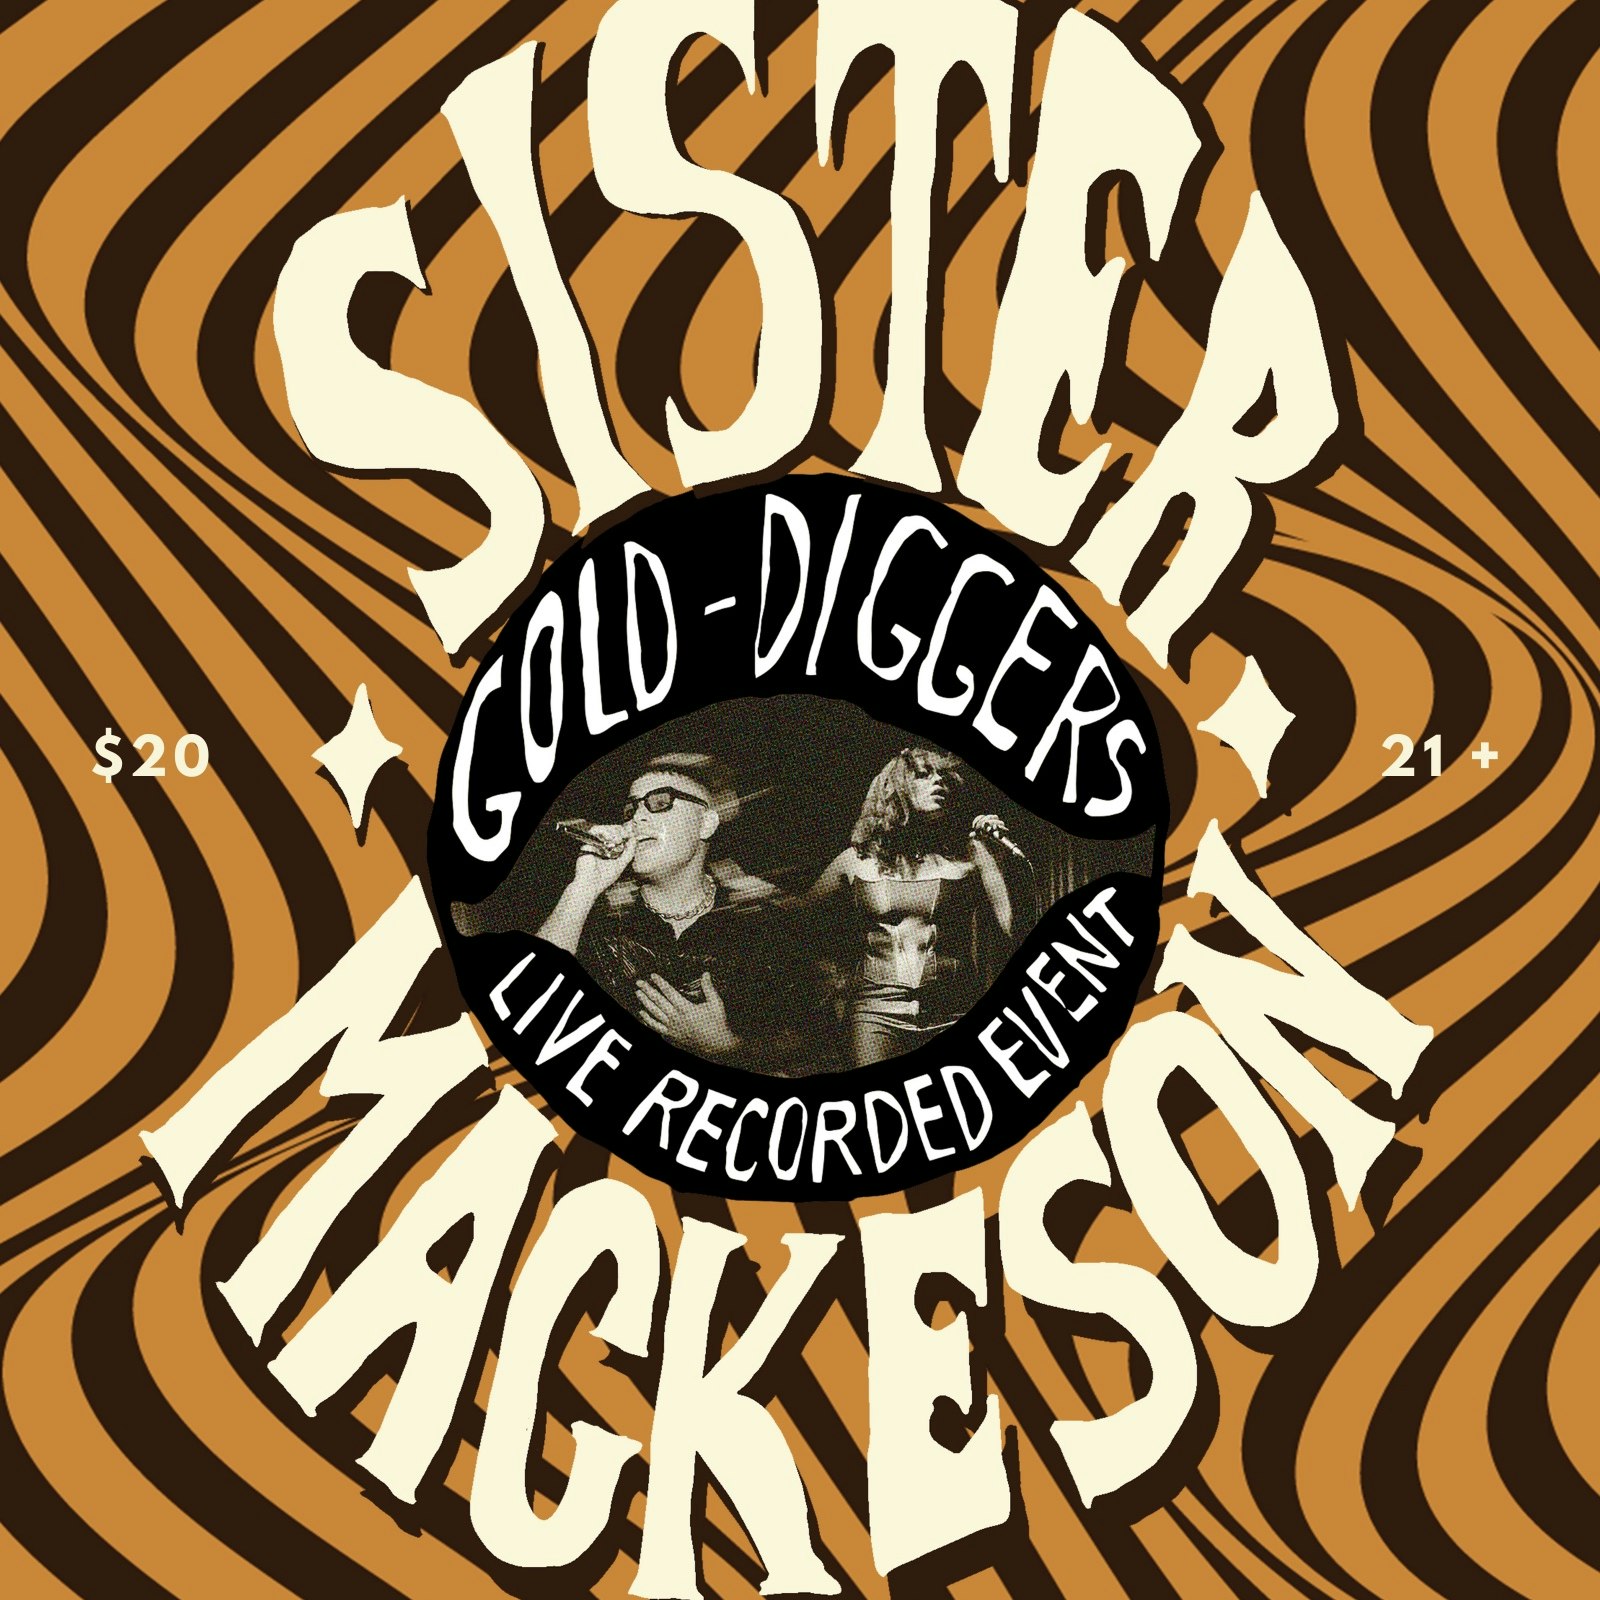 Mackeson & Sister Live Recorded Event